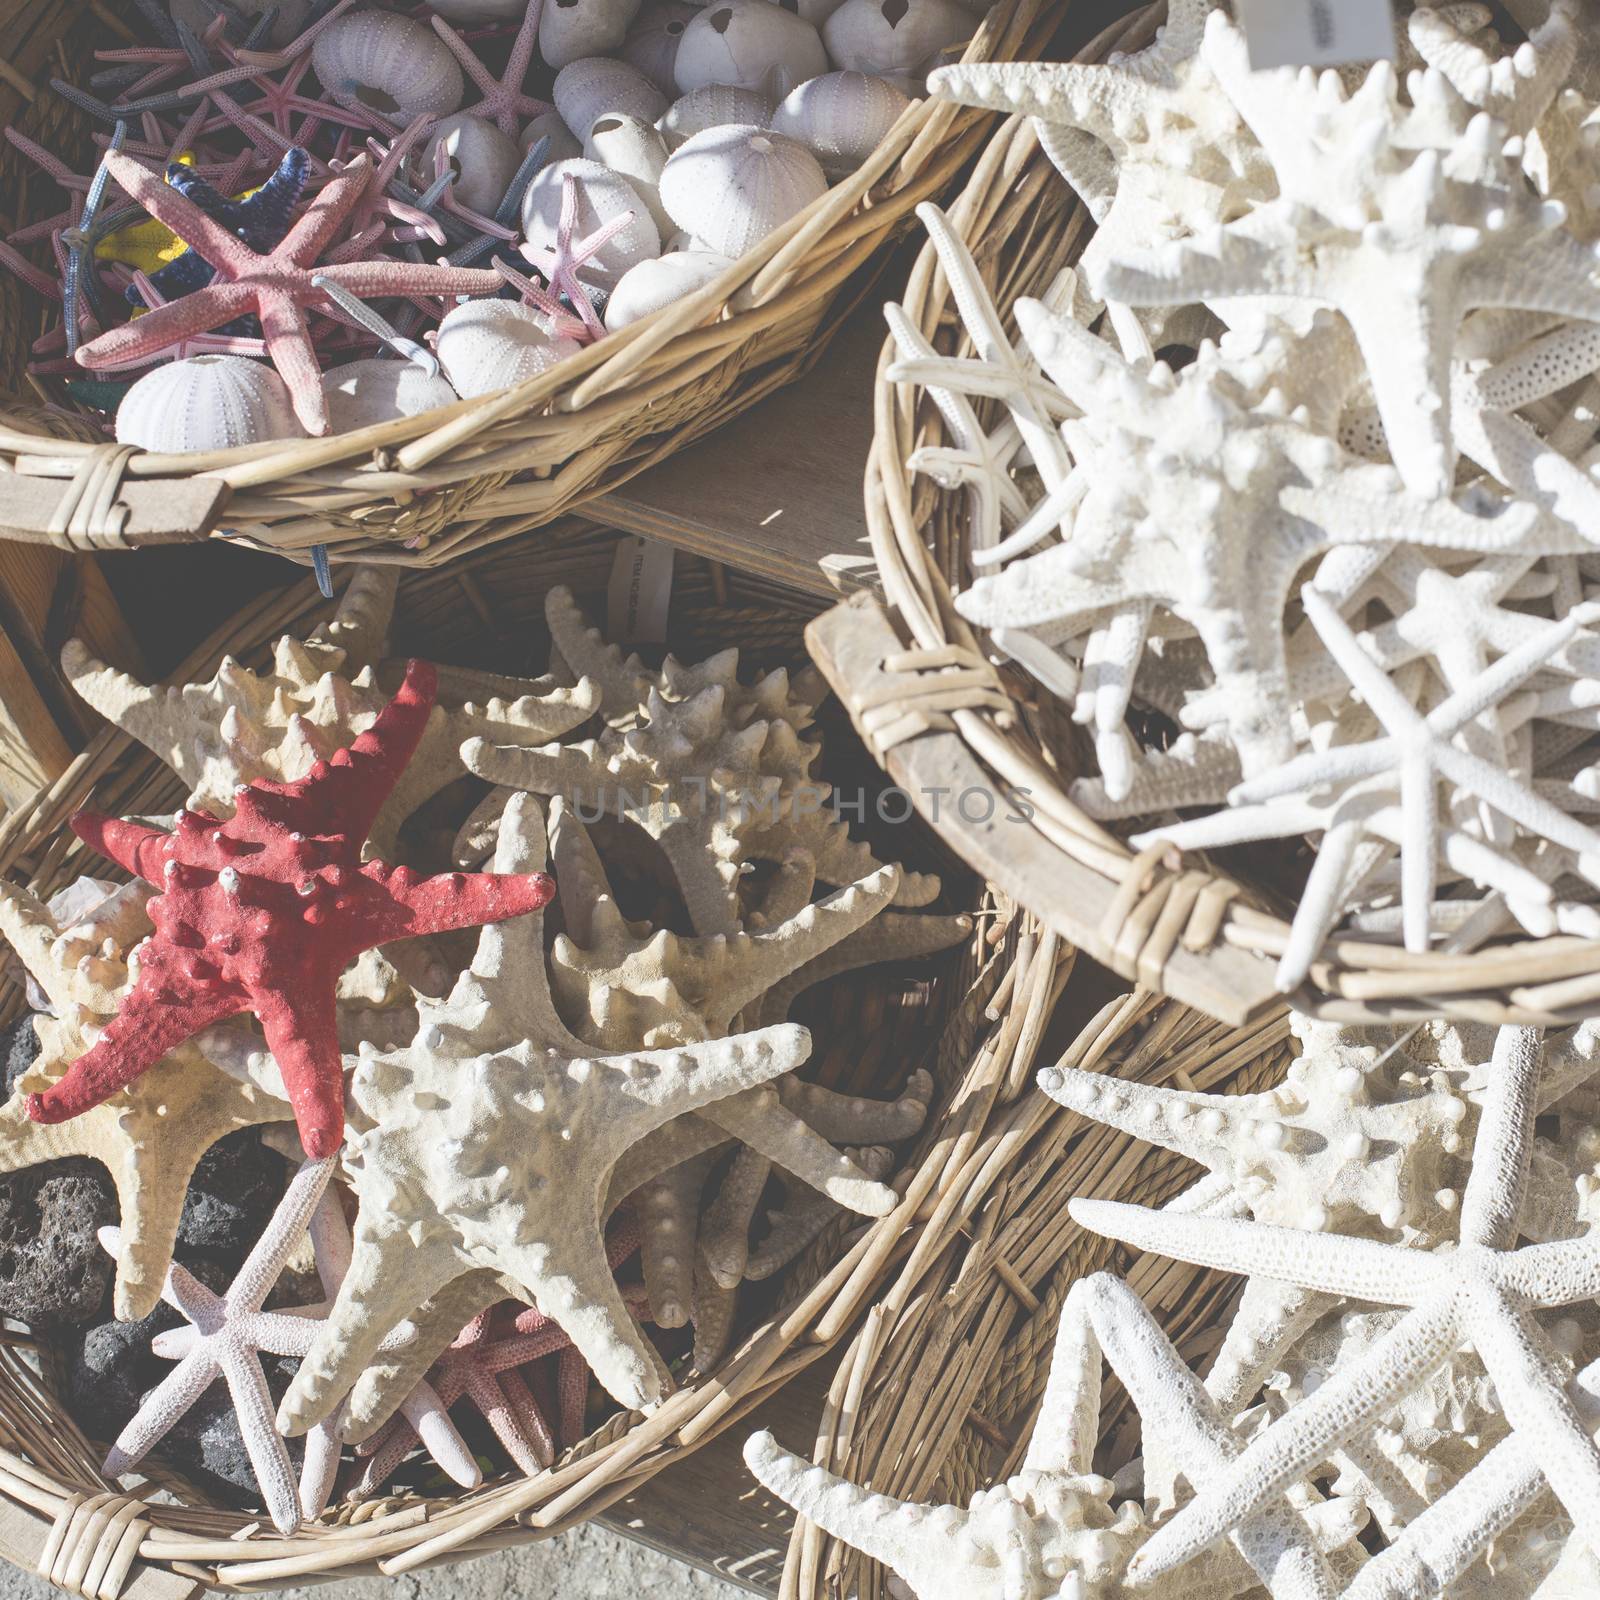 Starfish and seashells souvenirs for sale by mariusz_prusaczyk